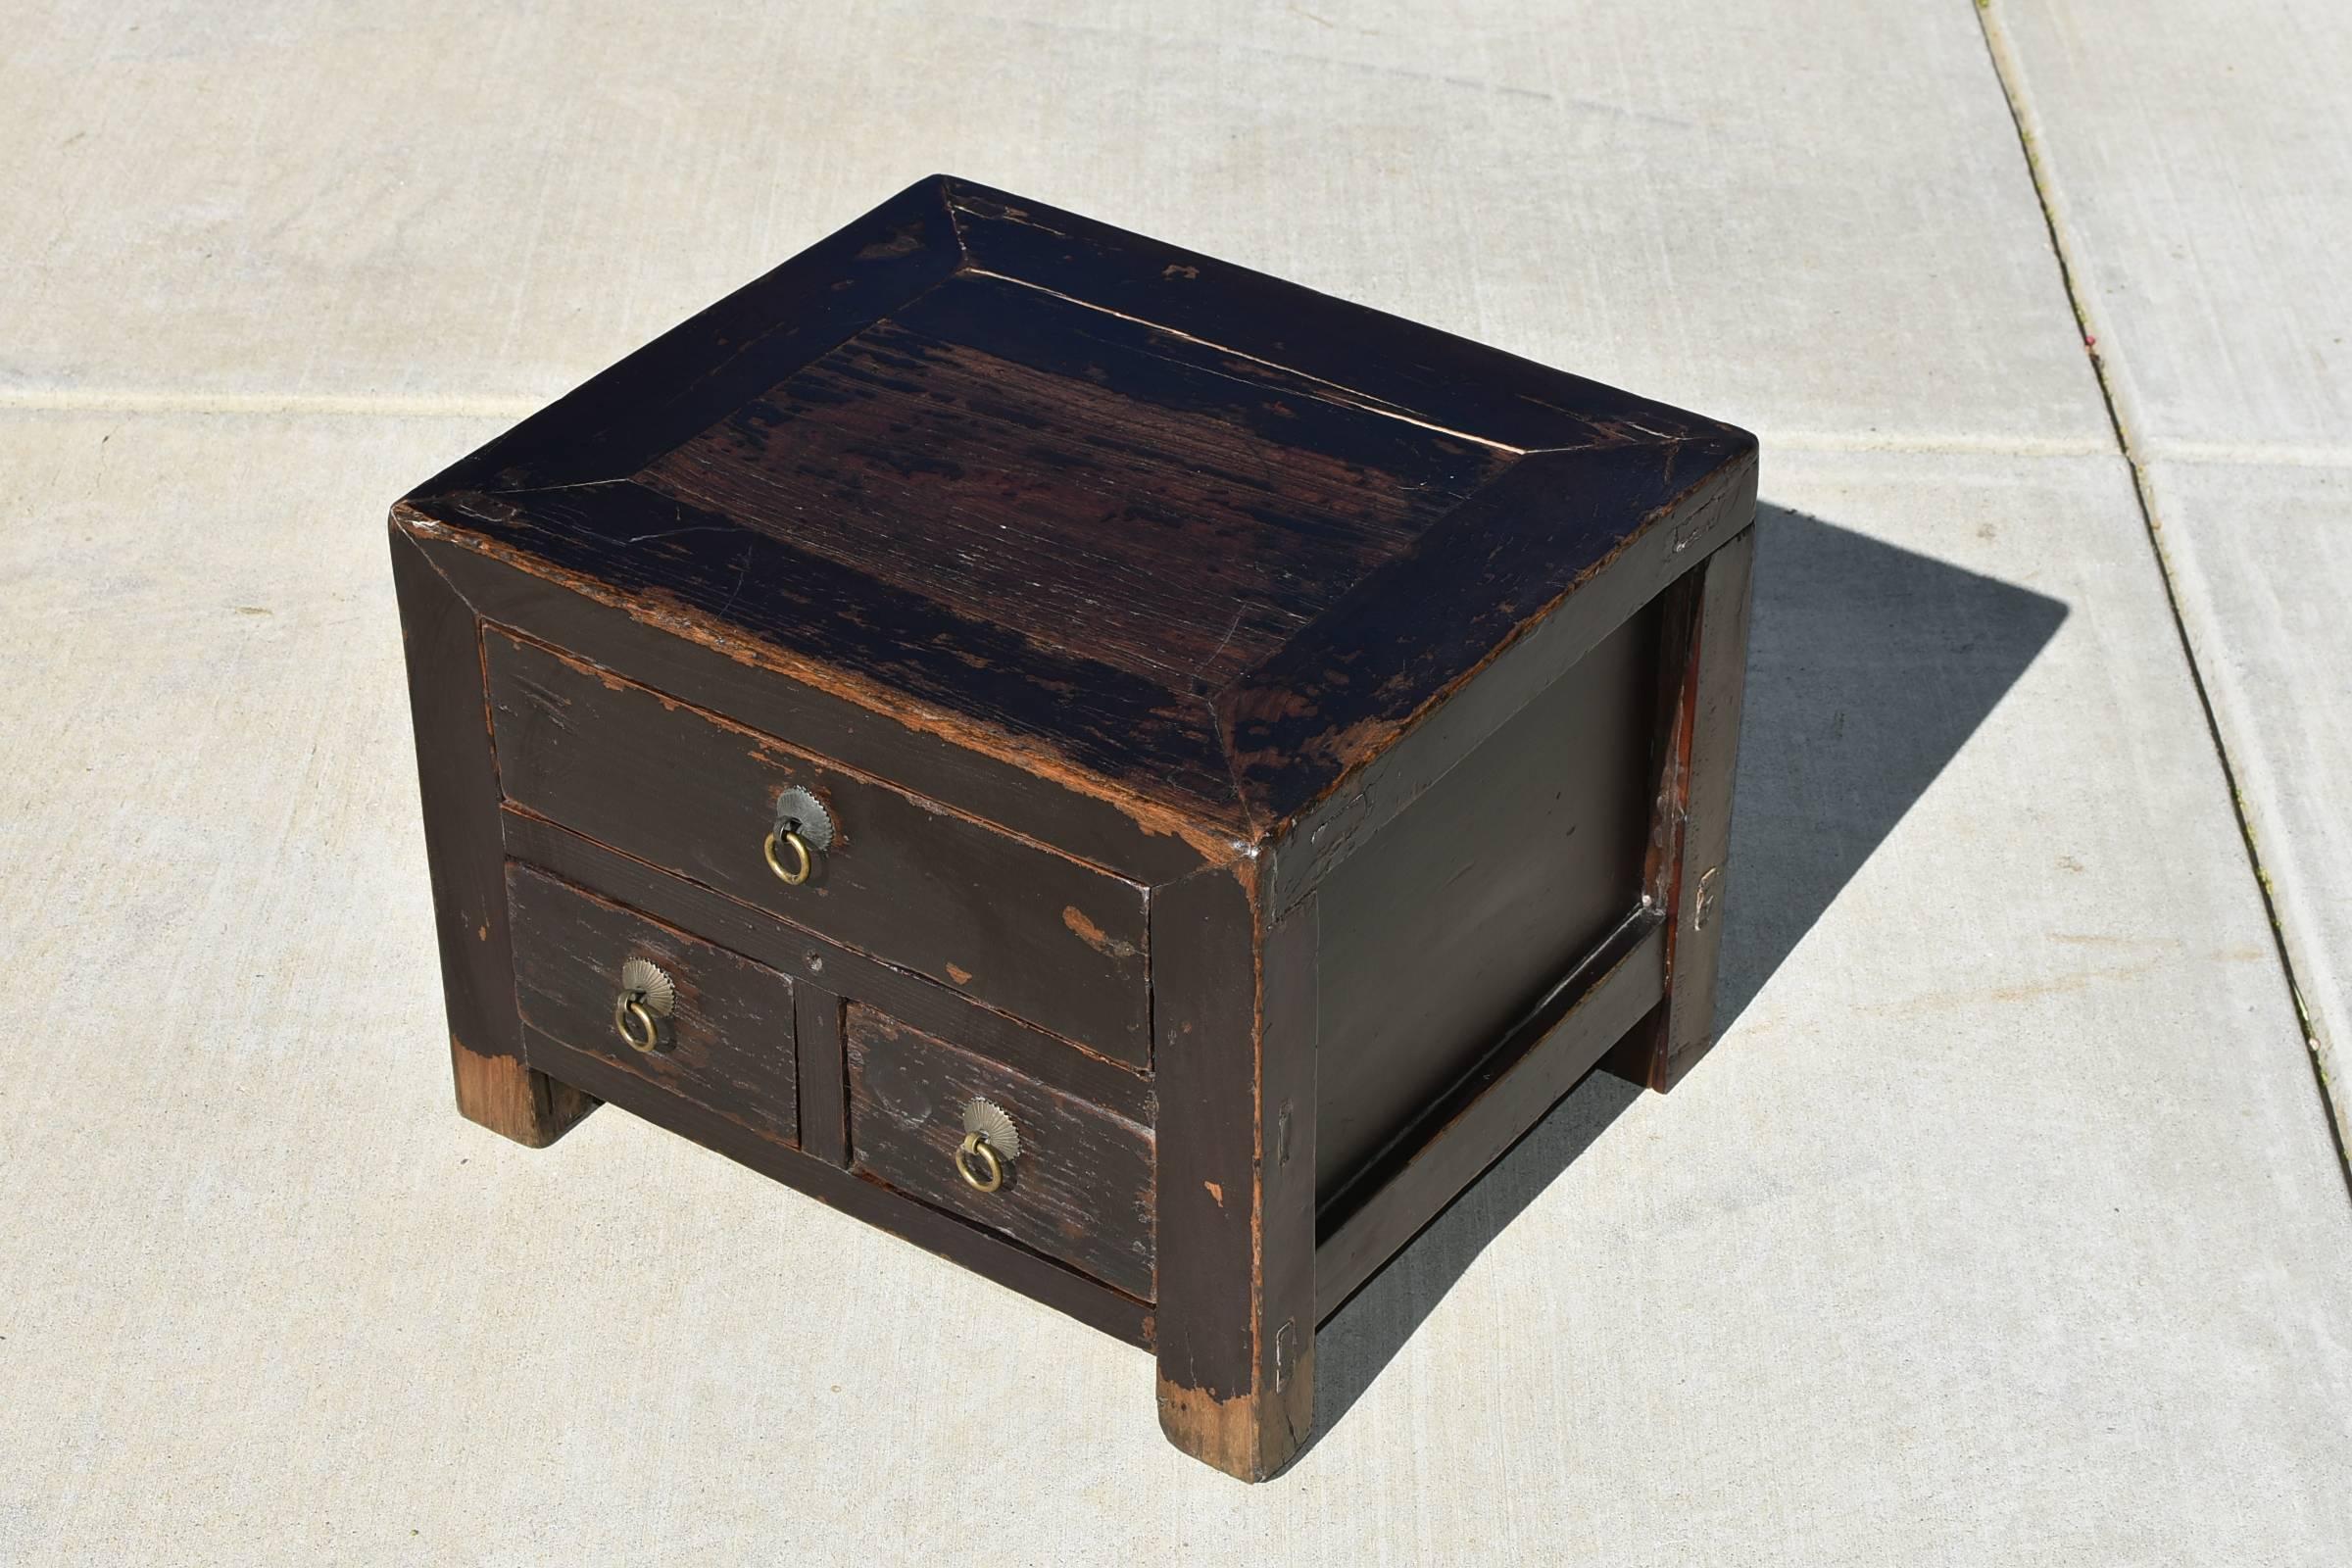 An antique Chinese chest, small but solid, very heavy and substantial.  This is a Northern Chinese piece that is used to store important items and placed near the bed. Three drawers keep things safe and near the owner.  All original. Solid wood.